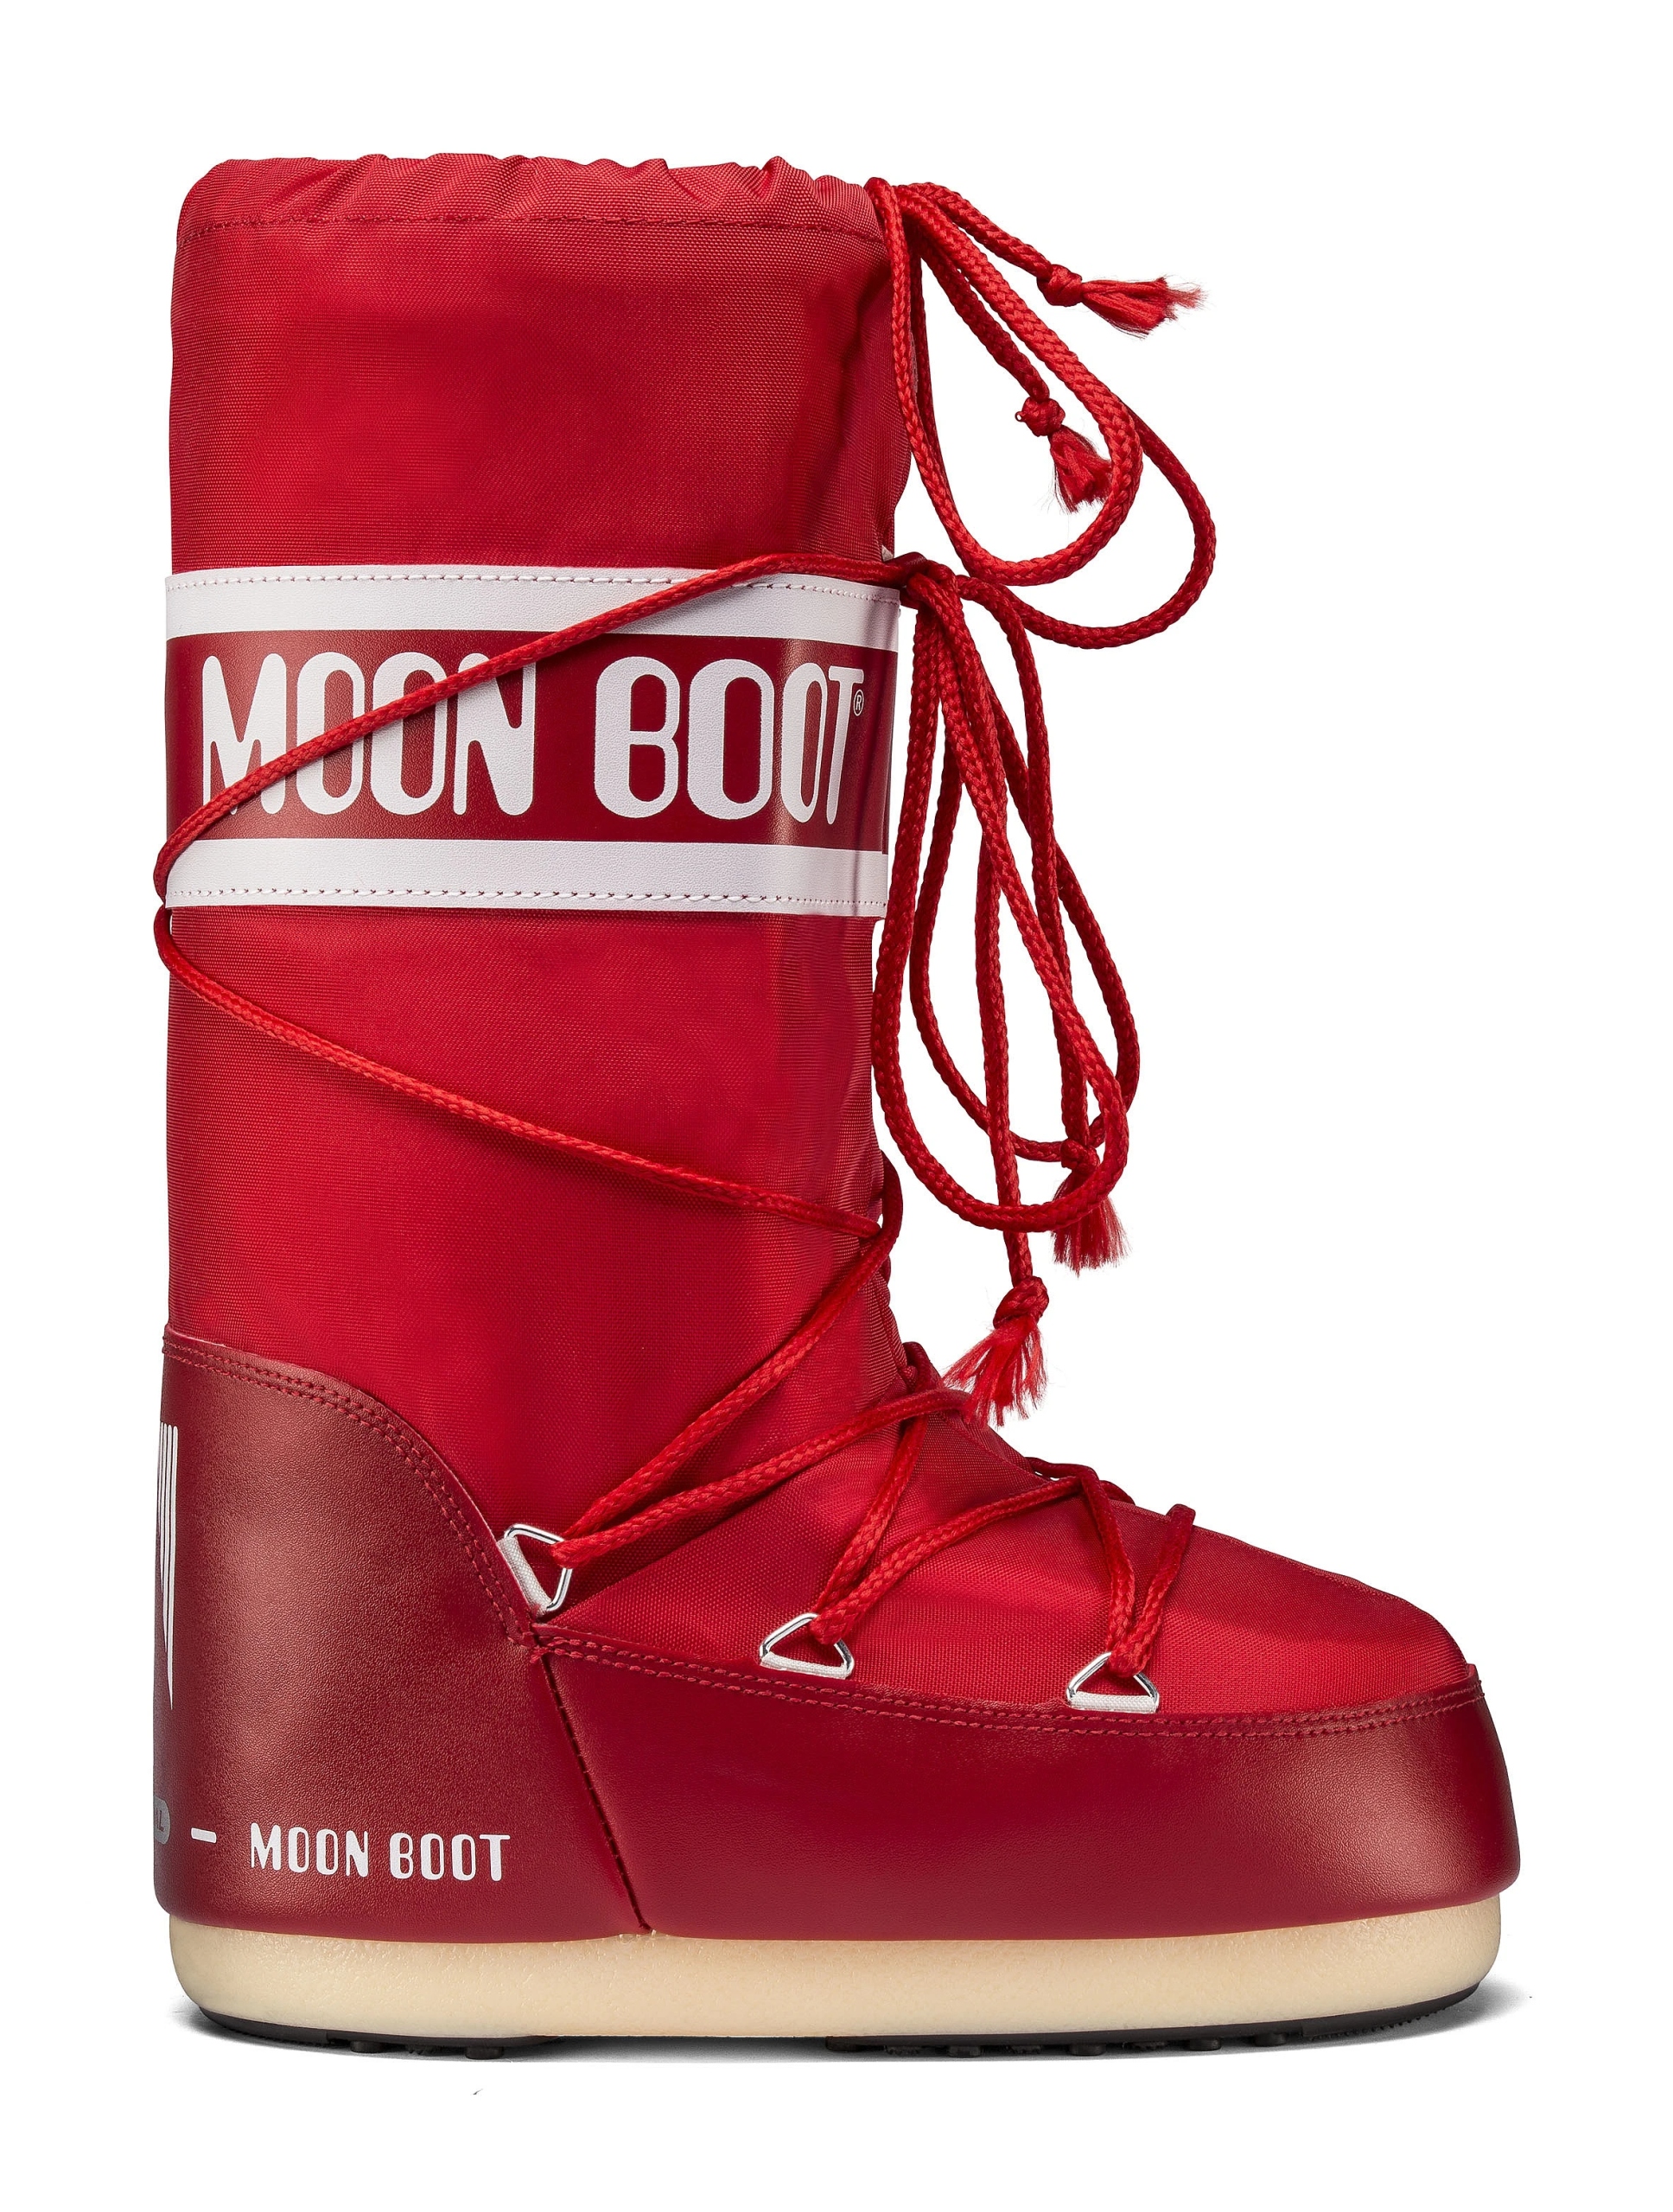 Topánky Tecnica Moon Boot Nylon - Red